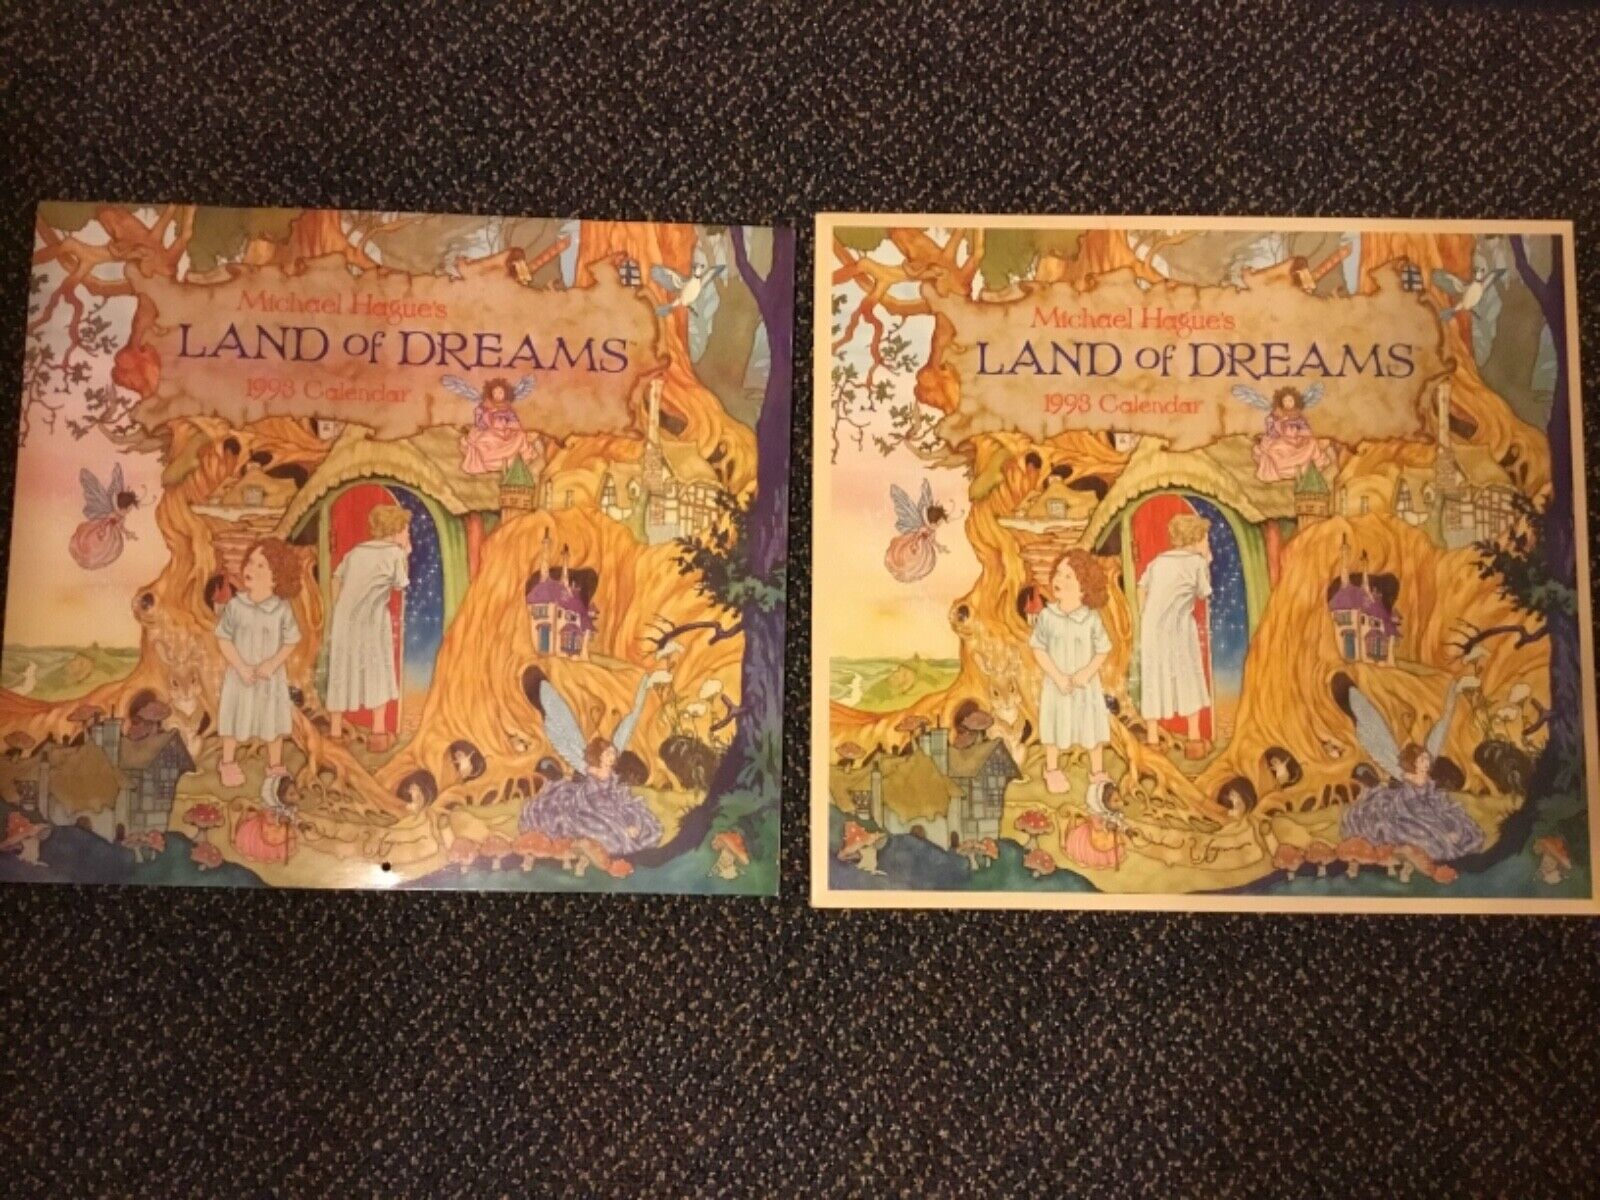 Michael Hague 1993 Land of Dreams Calendar With Cover - Beautiful And Rare